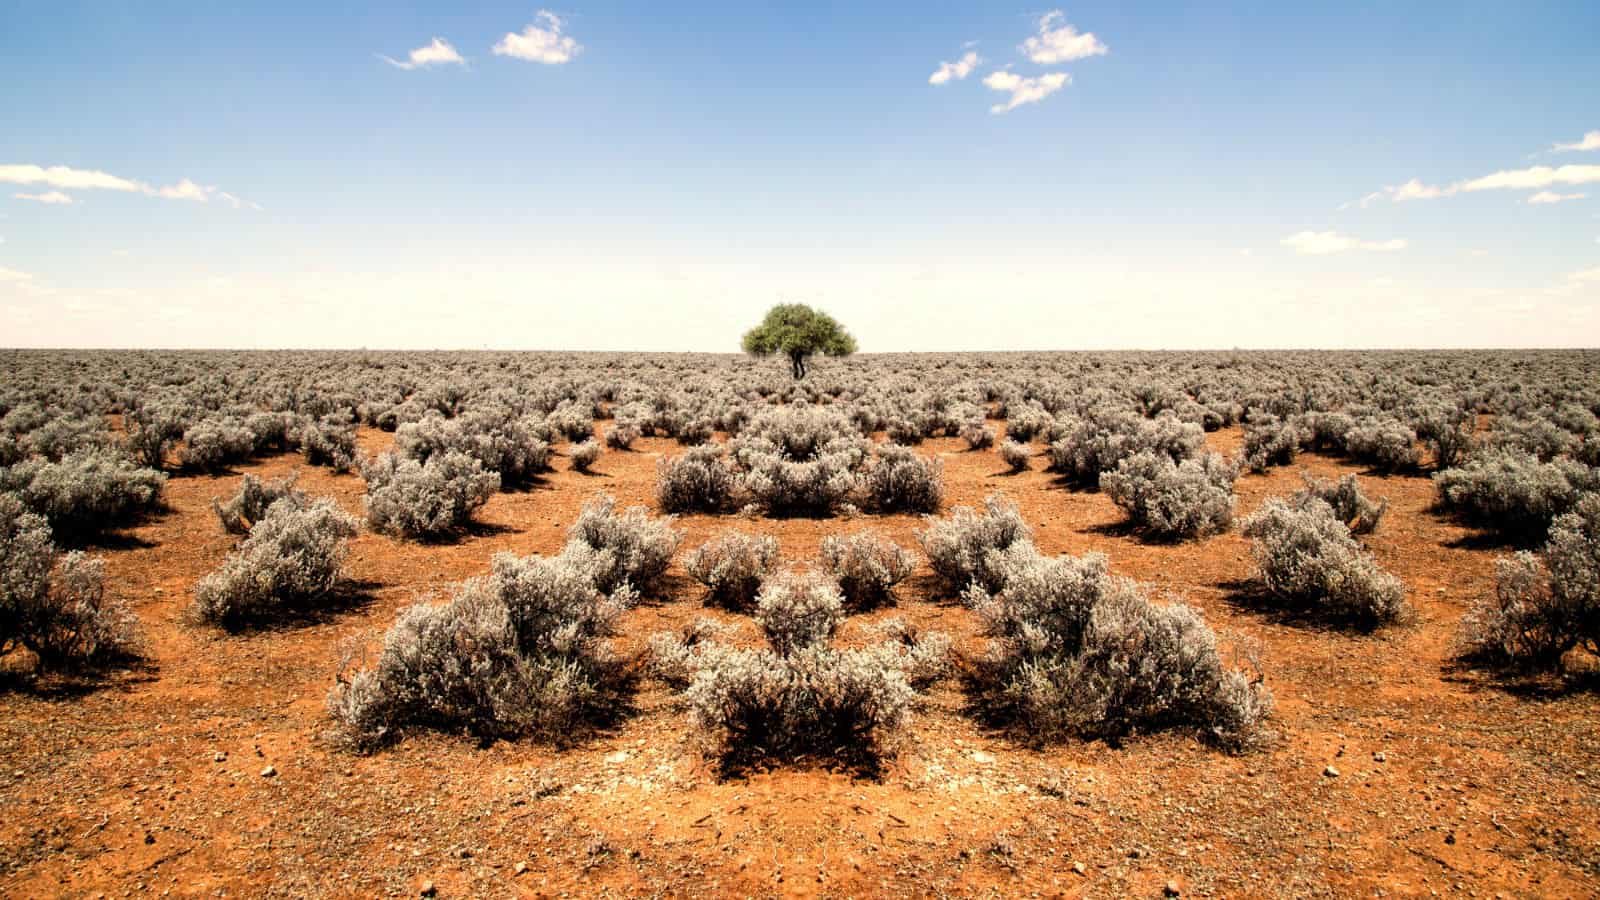 A lone tree surrounded by rusty dirty and bushes in Australia showing it can be possible to work in Australia.